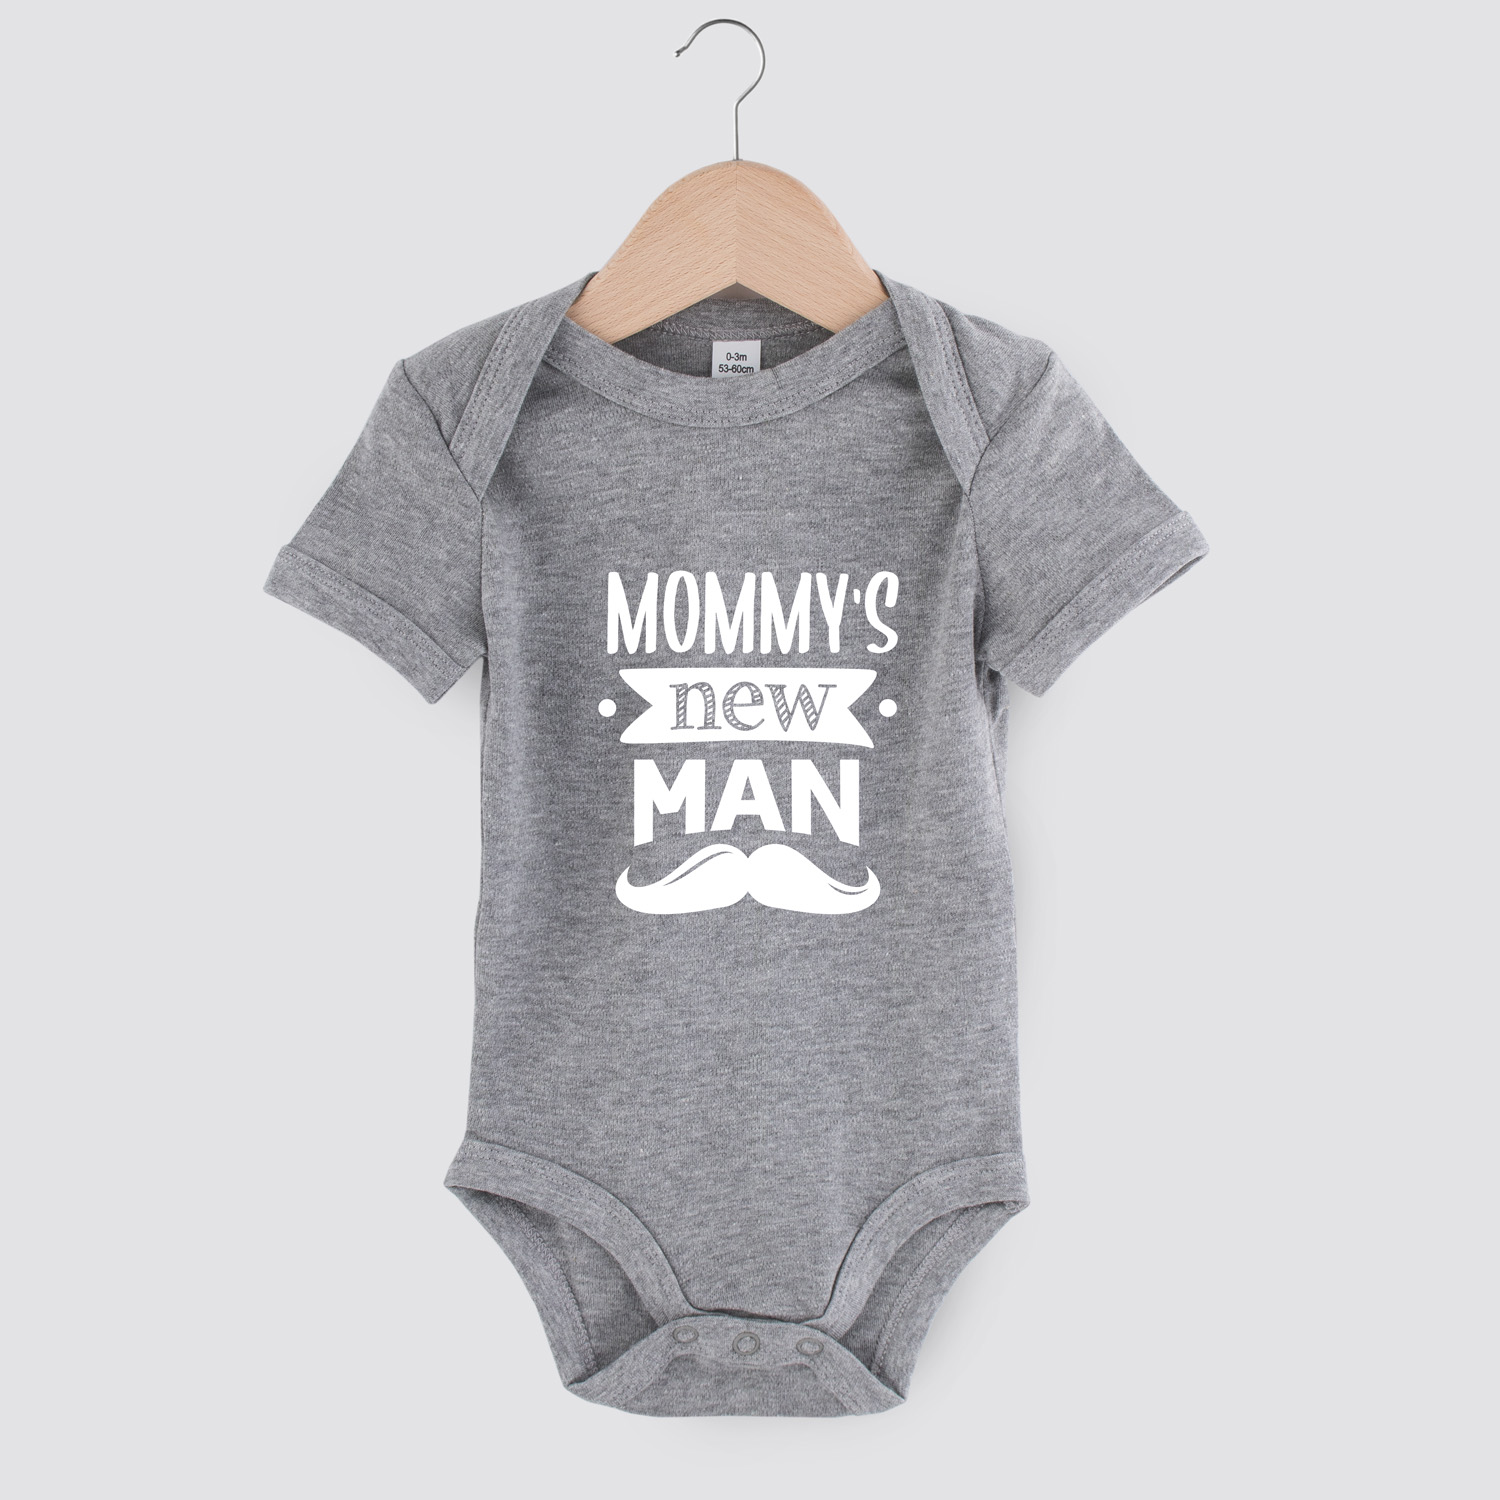 Mommy's new man | Baby romper | my fabulous life.